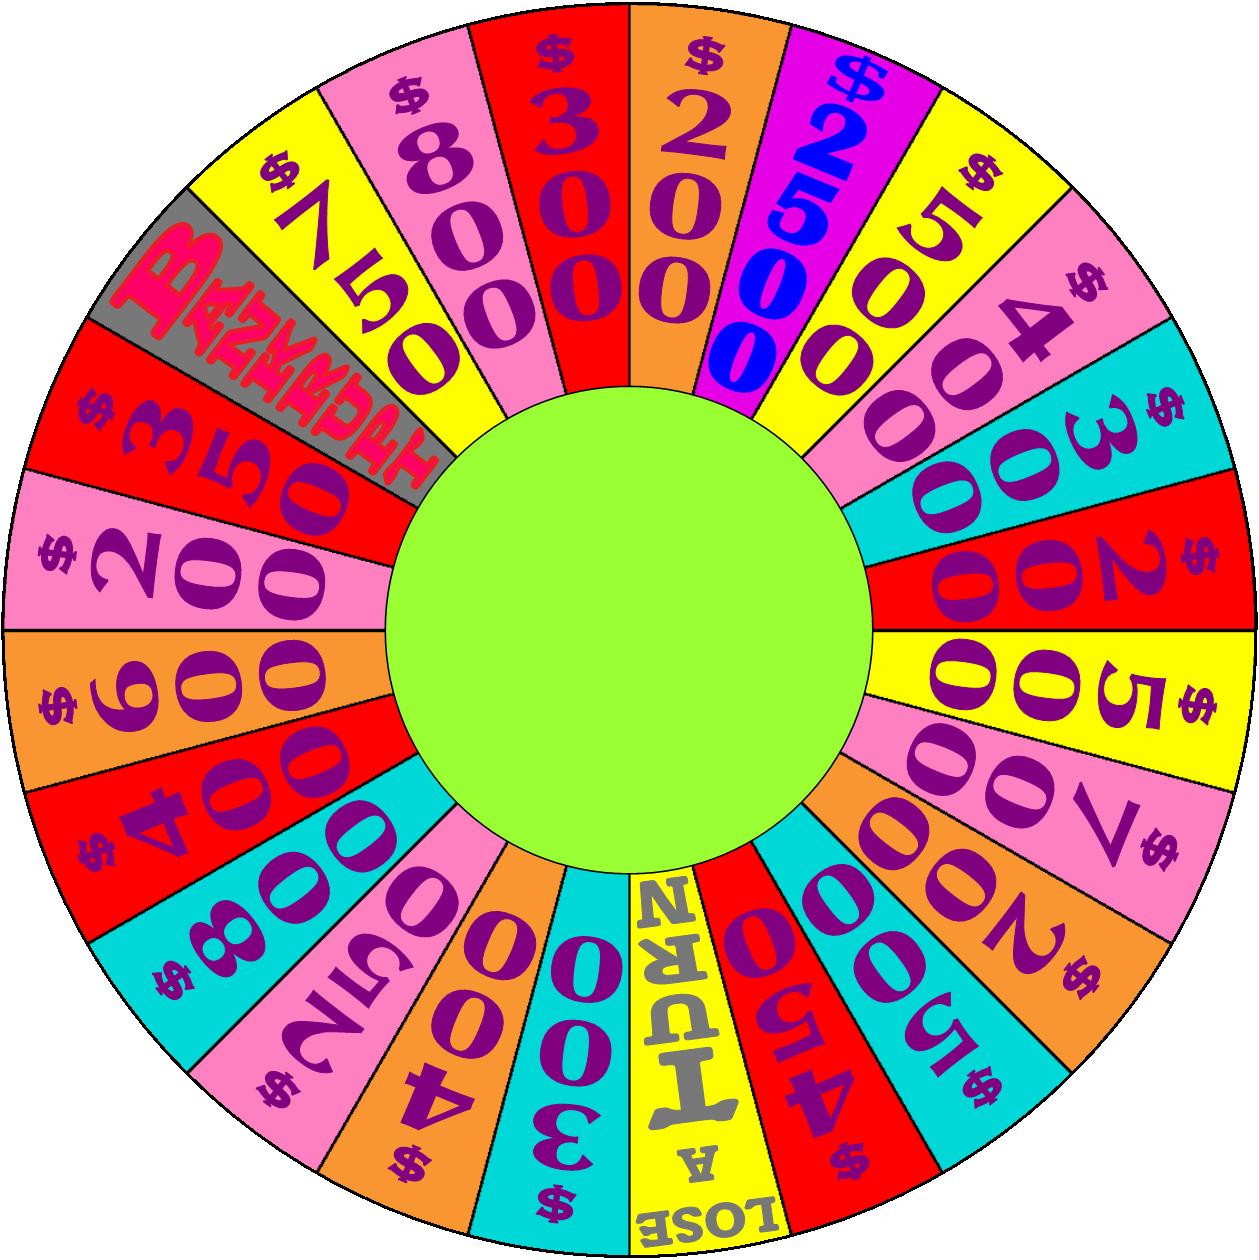 Brite Wheel of Fortune 1 by germanname